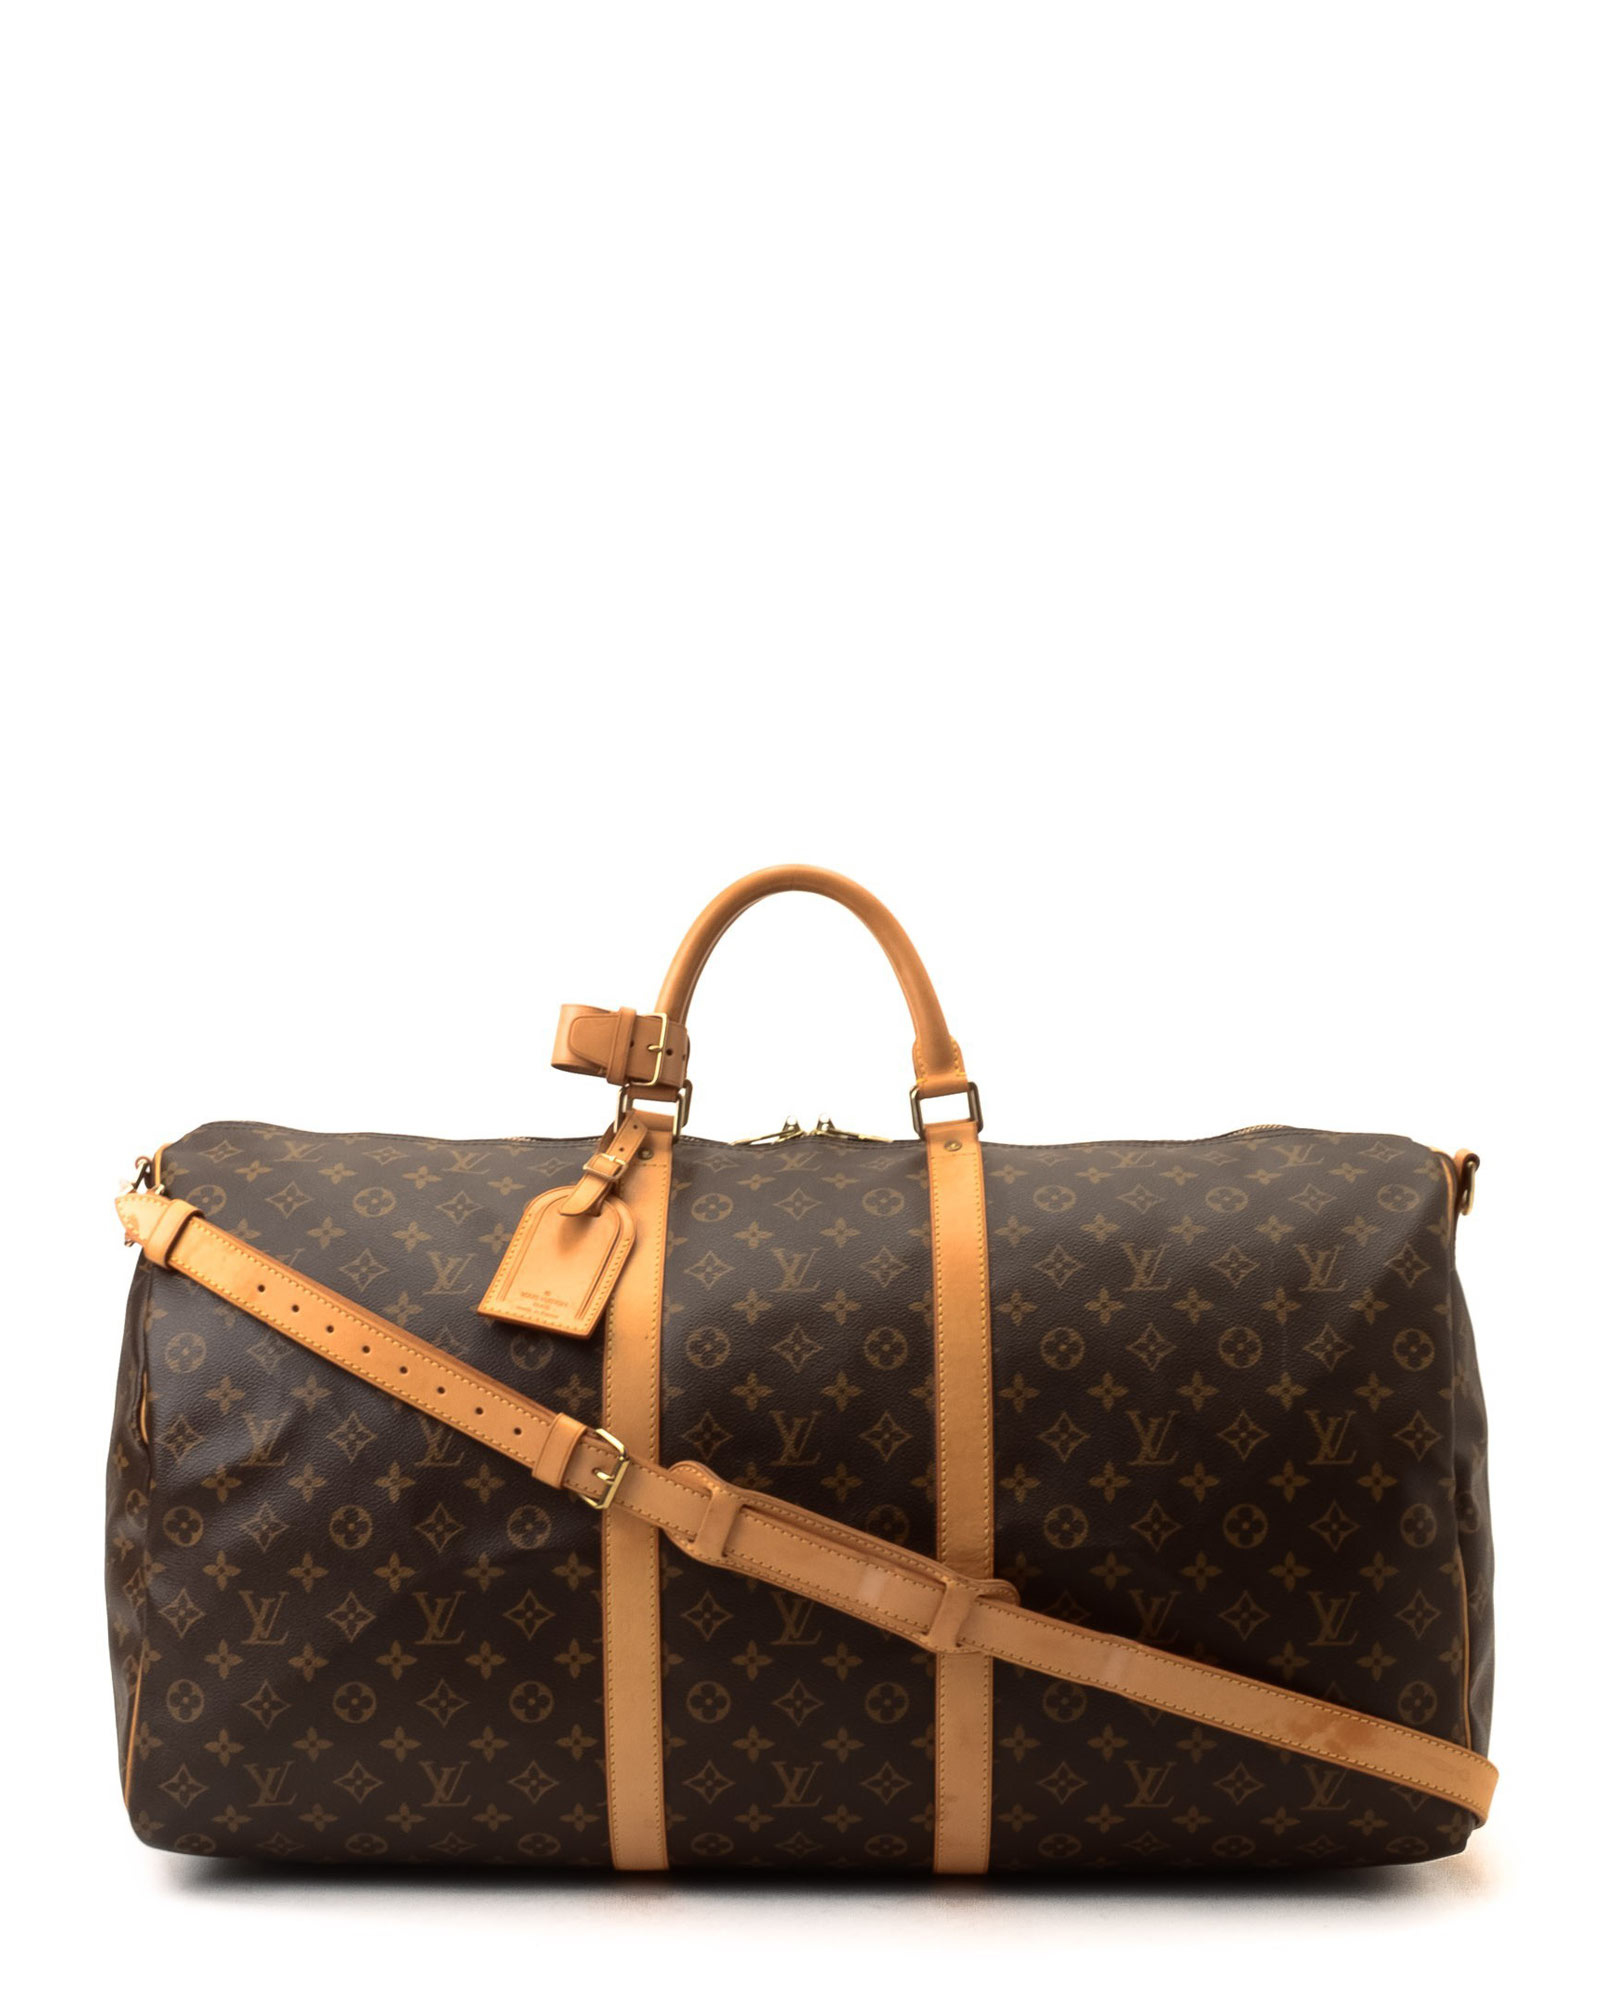 Louis Vuitton Travel Bags Replica | Confederated Tribes of the Umatilla Indian Reservation